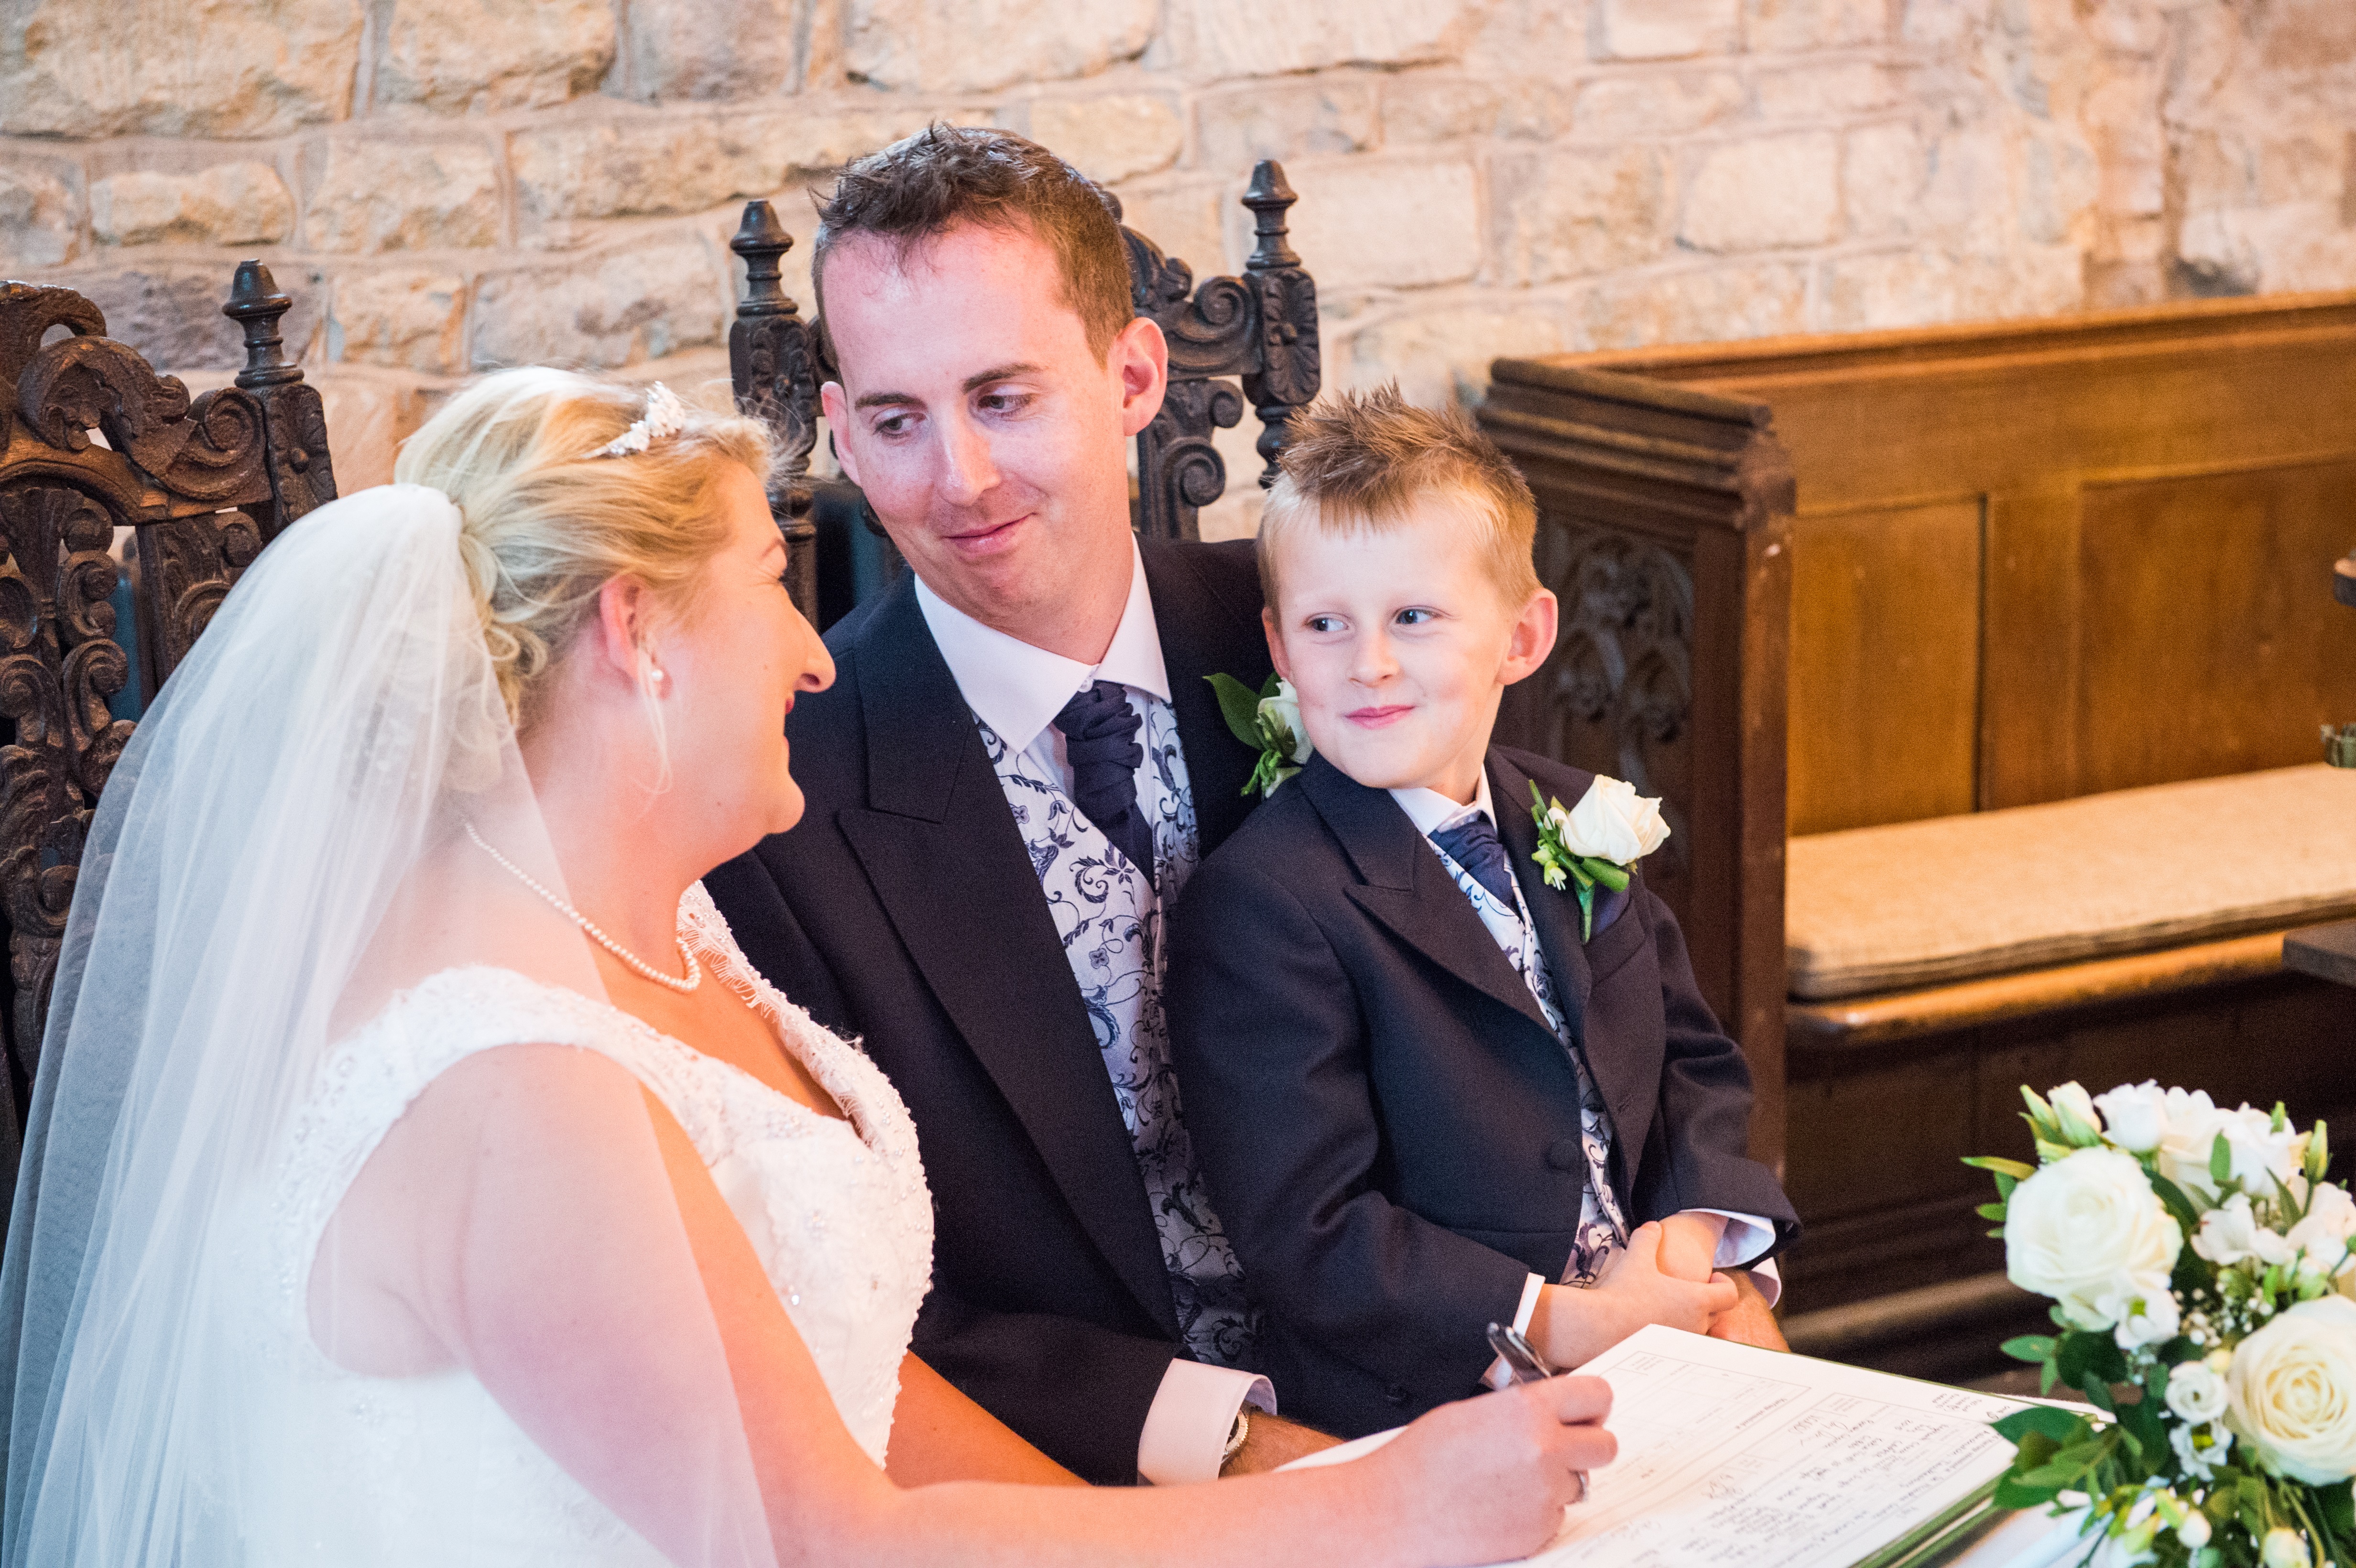 Bride and groom signing the register with their son on his dad's knee